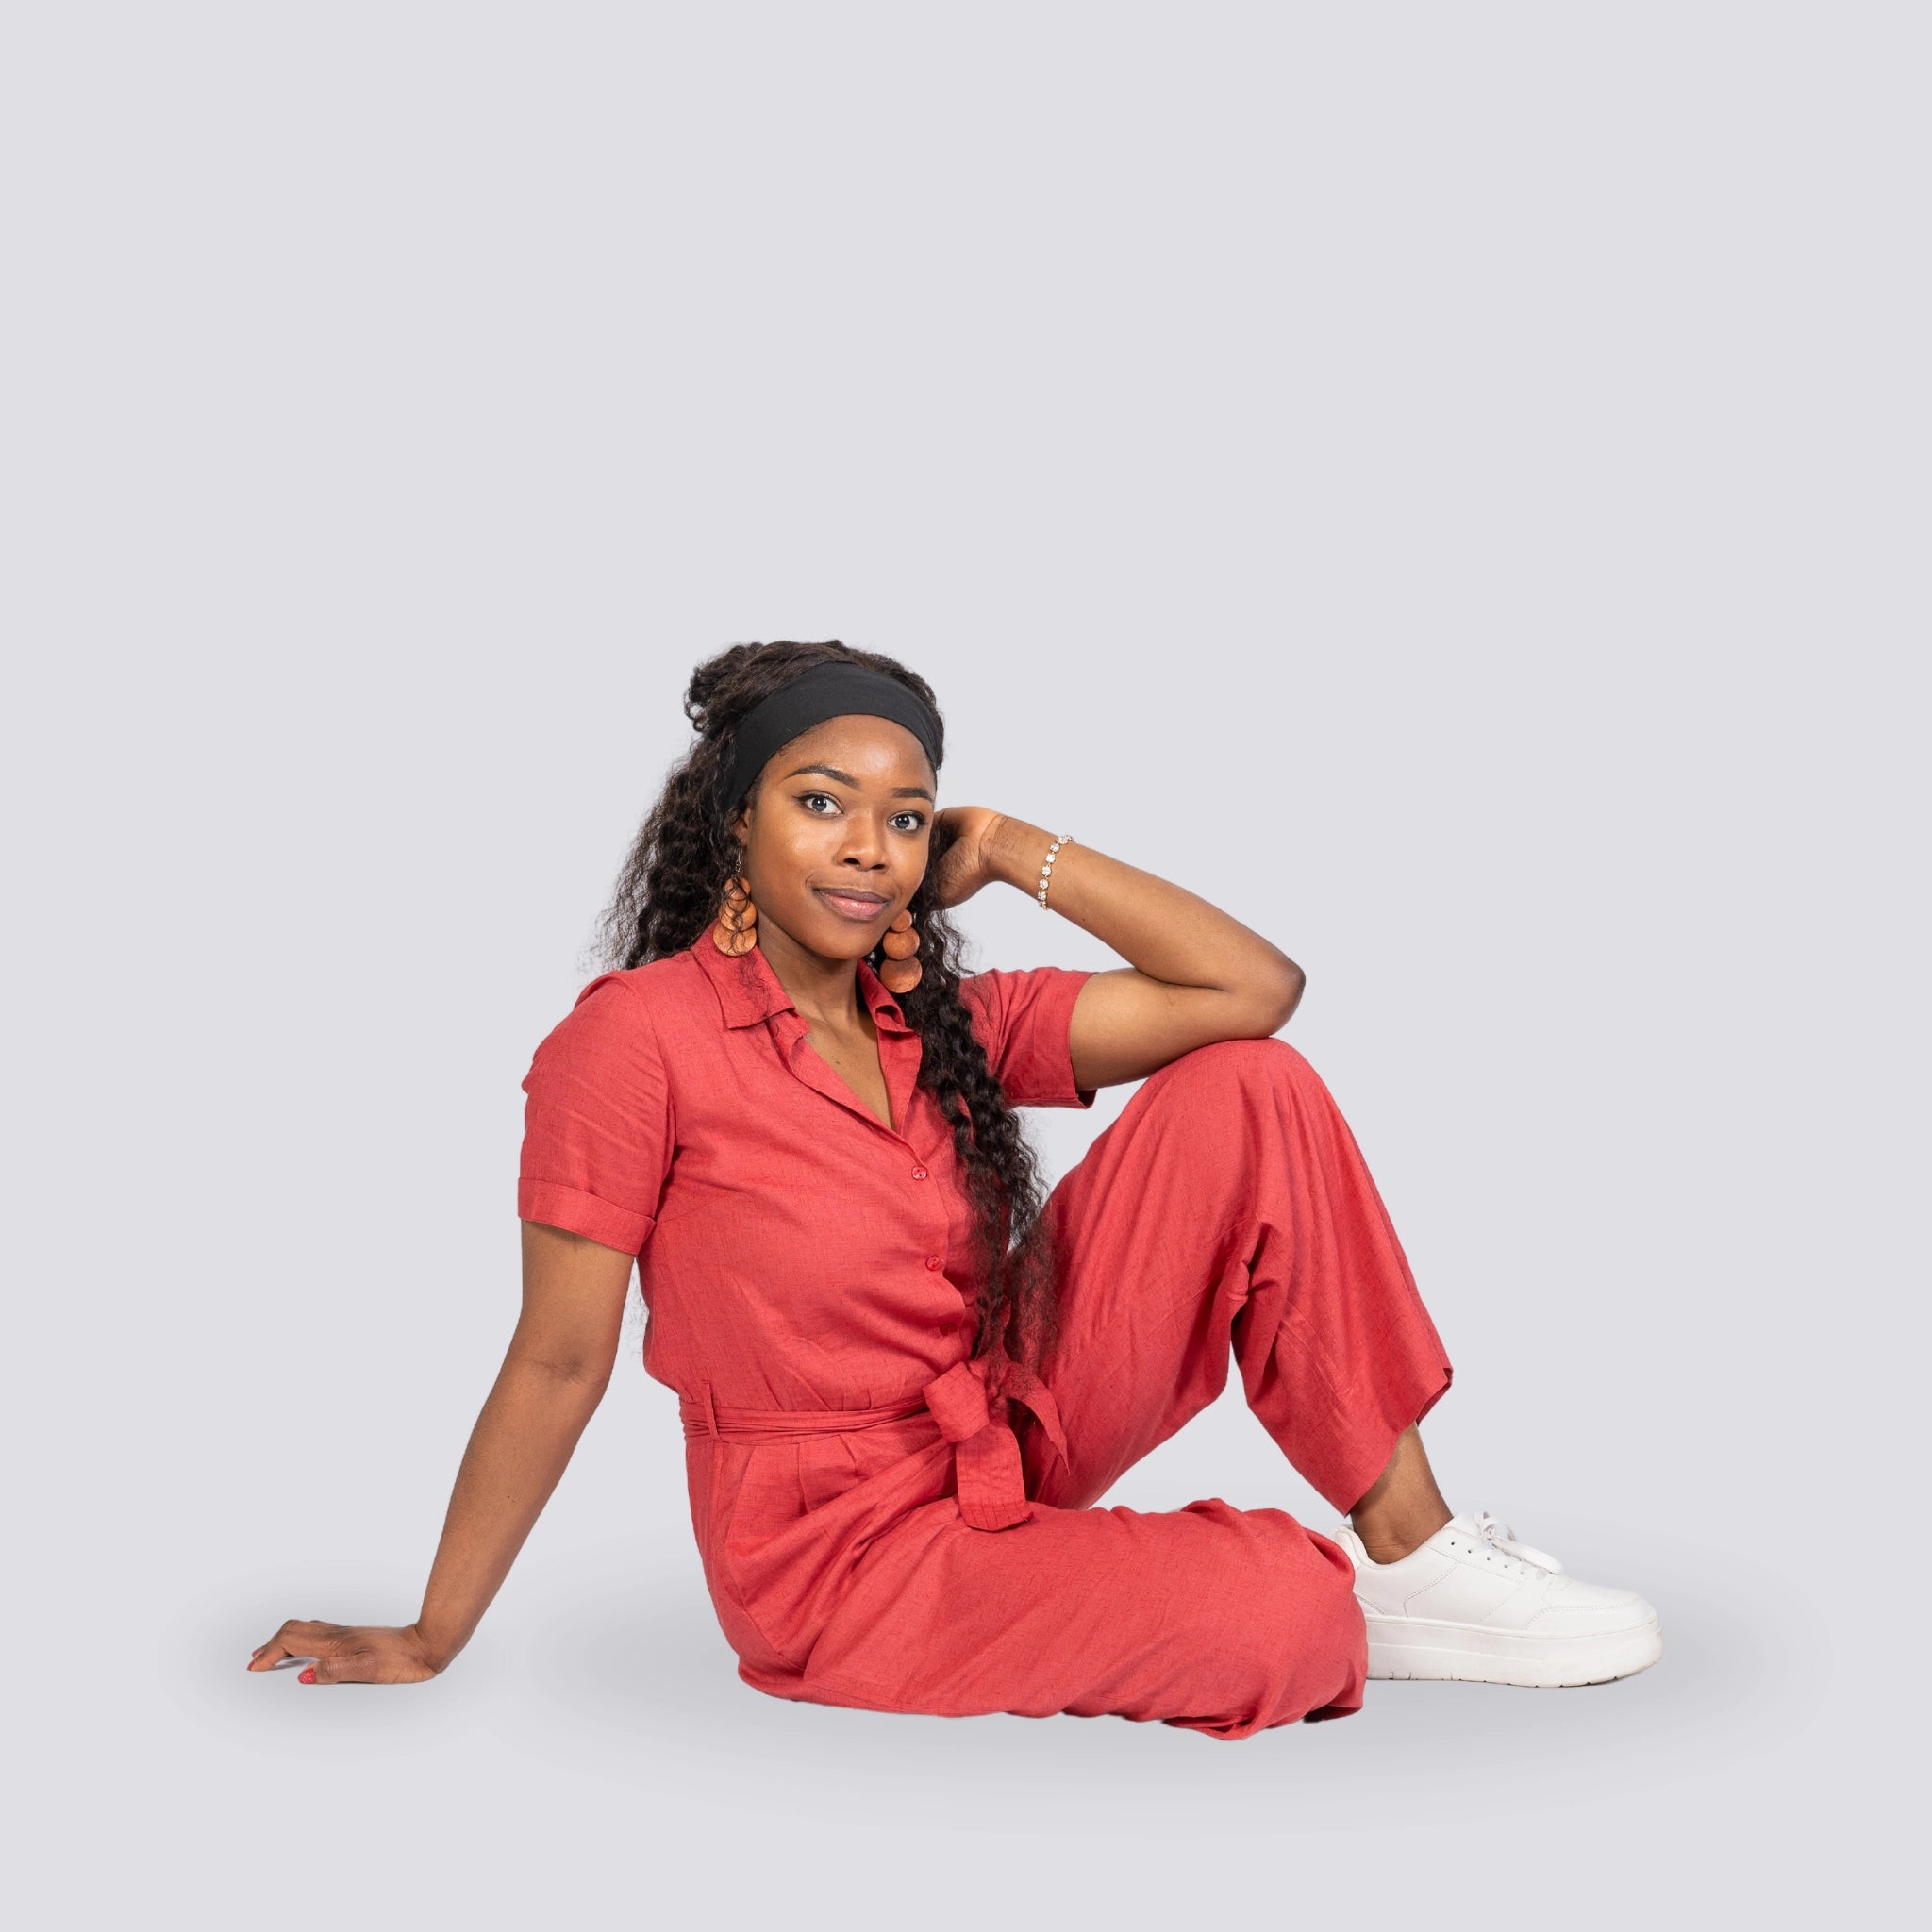 A woman in a Milano Red Serenity Viscose Linen Jumpsuit by Karee sits on the ground, leaning on one hand, wearing white sneakers and a headband.